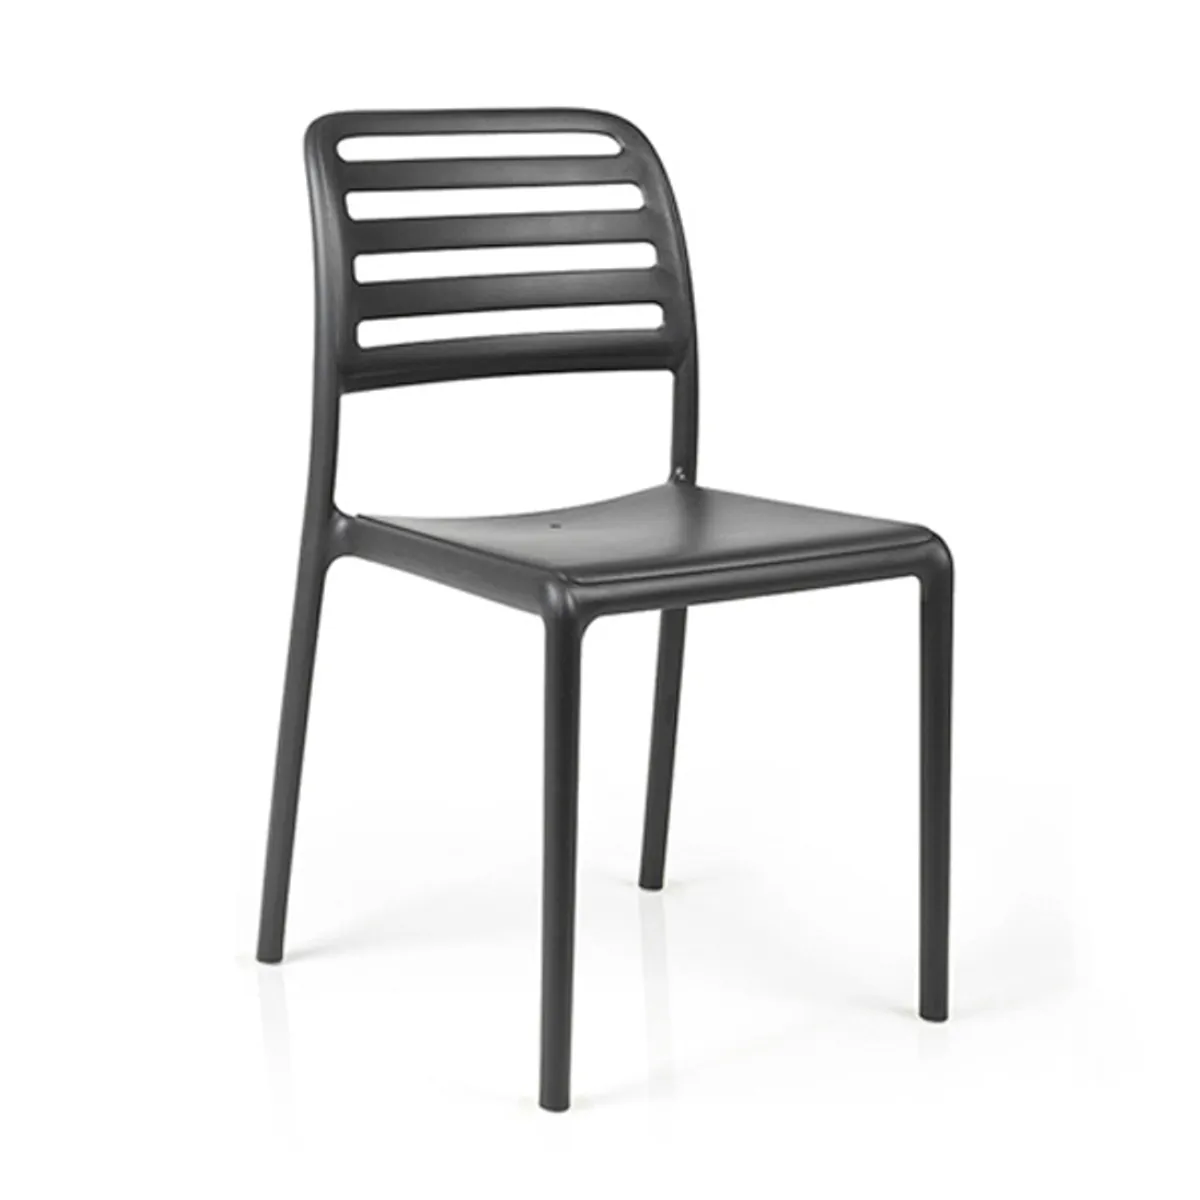 Costa bistrot side chair 3